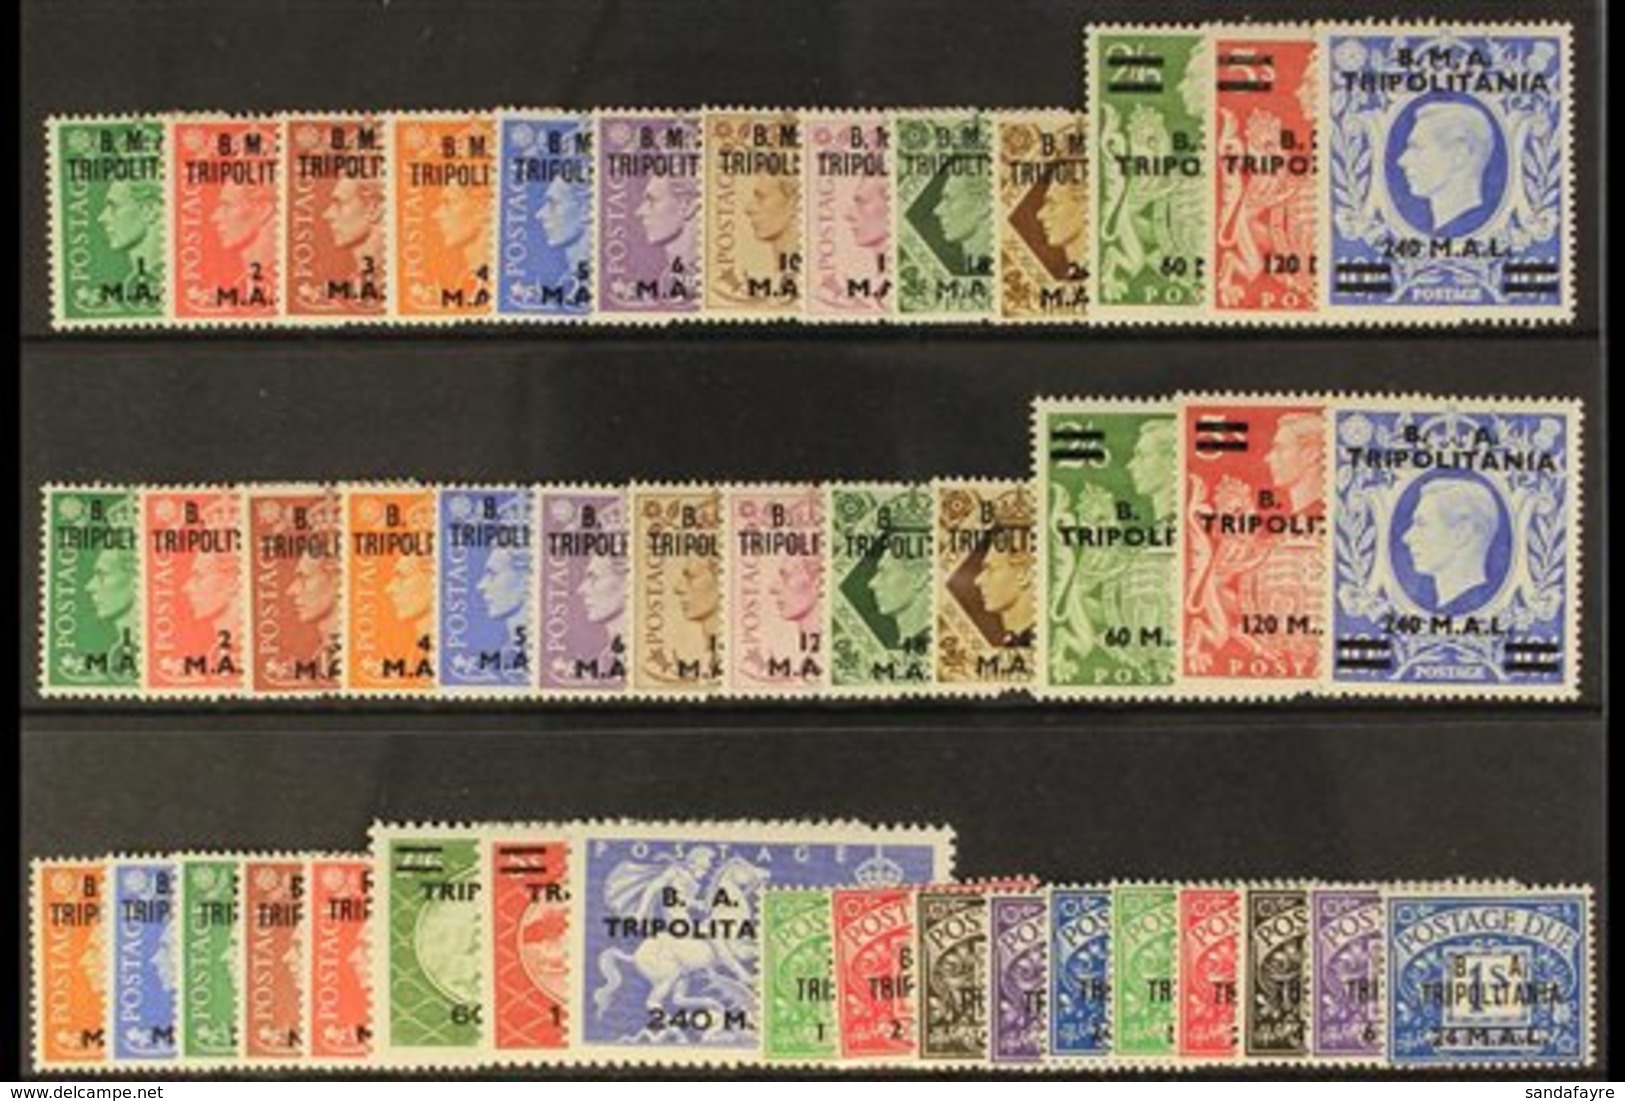 TRIPOLITANIA 1948-51 COMPLETE MINT COLLECTION On A Stock Card, SG T1/T34 Plus Postage Due Sets, SG TD1/TD10, Very Fine M - Afrique Orientale Italienne